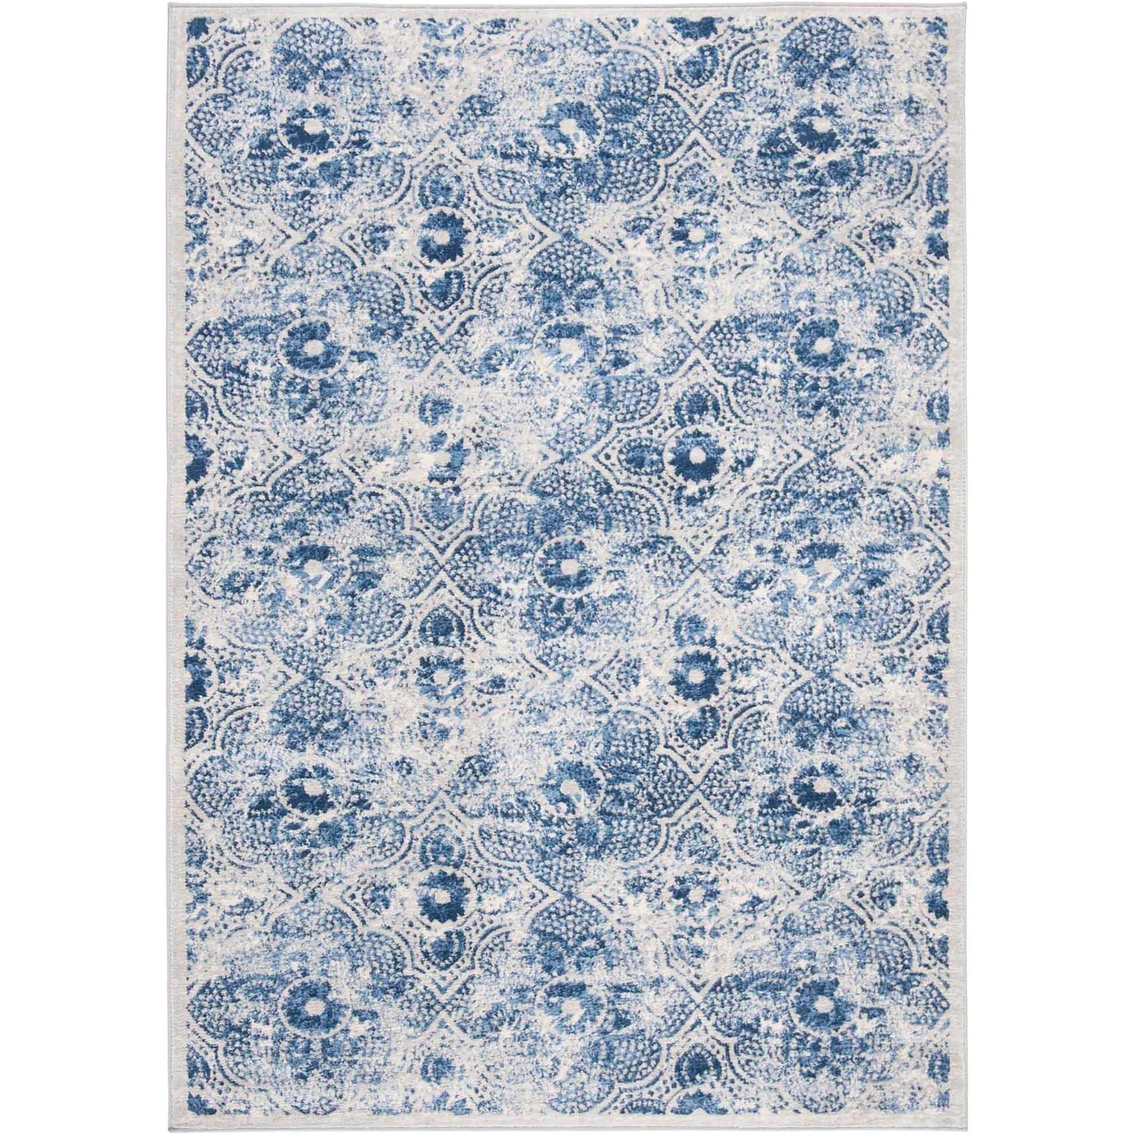 Martha Stewart Collection 2862 Area Rug - Image 1 of 4